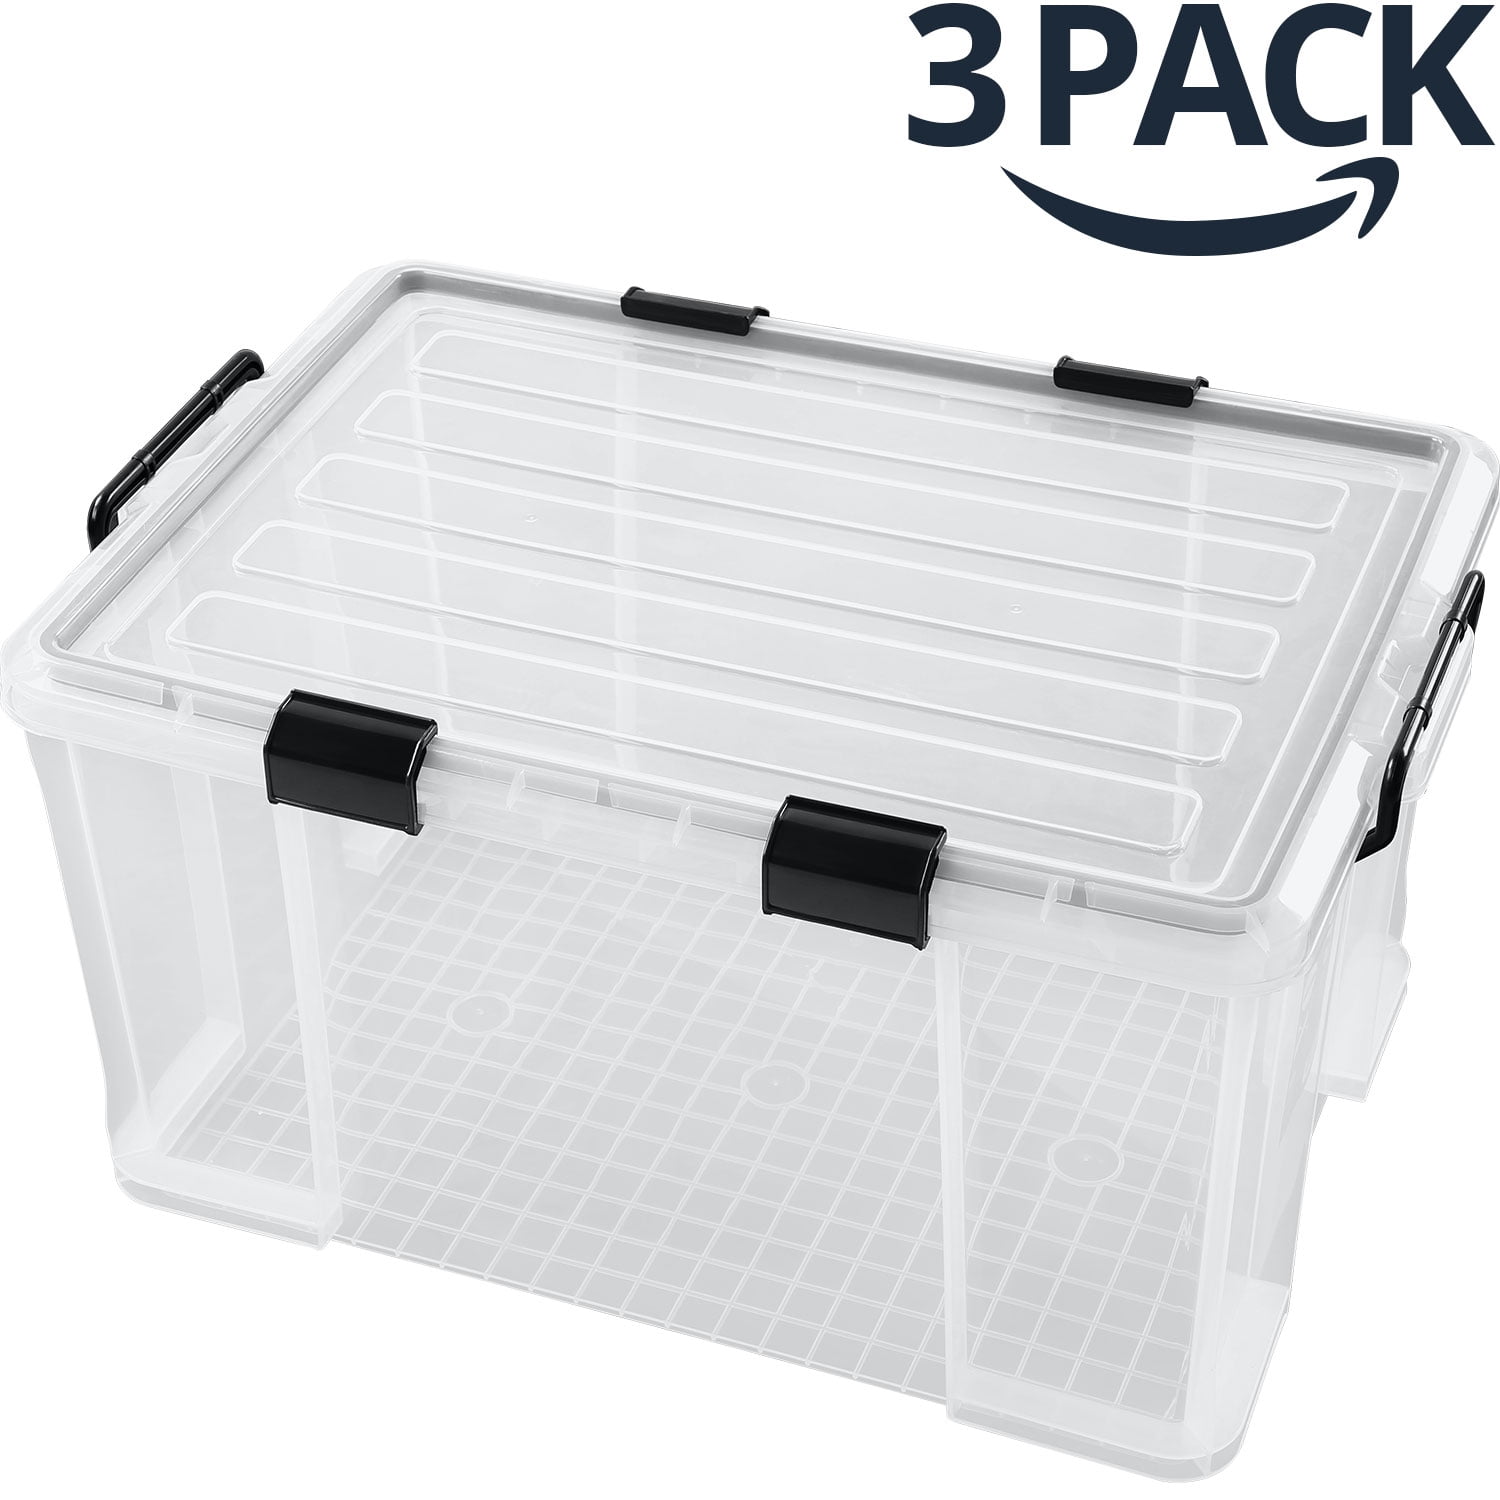 3pcs 85L Waterproof Garage Outdoor Storage Containers, Durable Waterproof Big  Plastic Bins with Sealing Lids for Kitchen Food Shoes Toys Craft Under Bed  Organizers, Transparent 27.75x18.89x15.16inch 